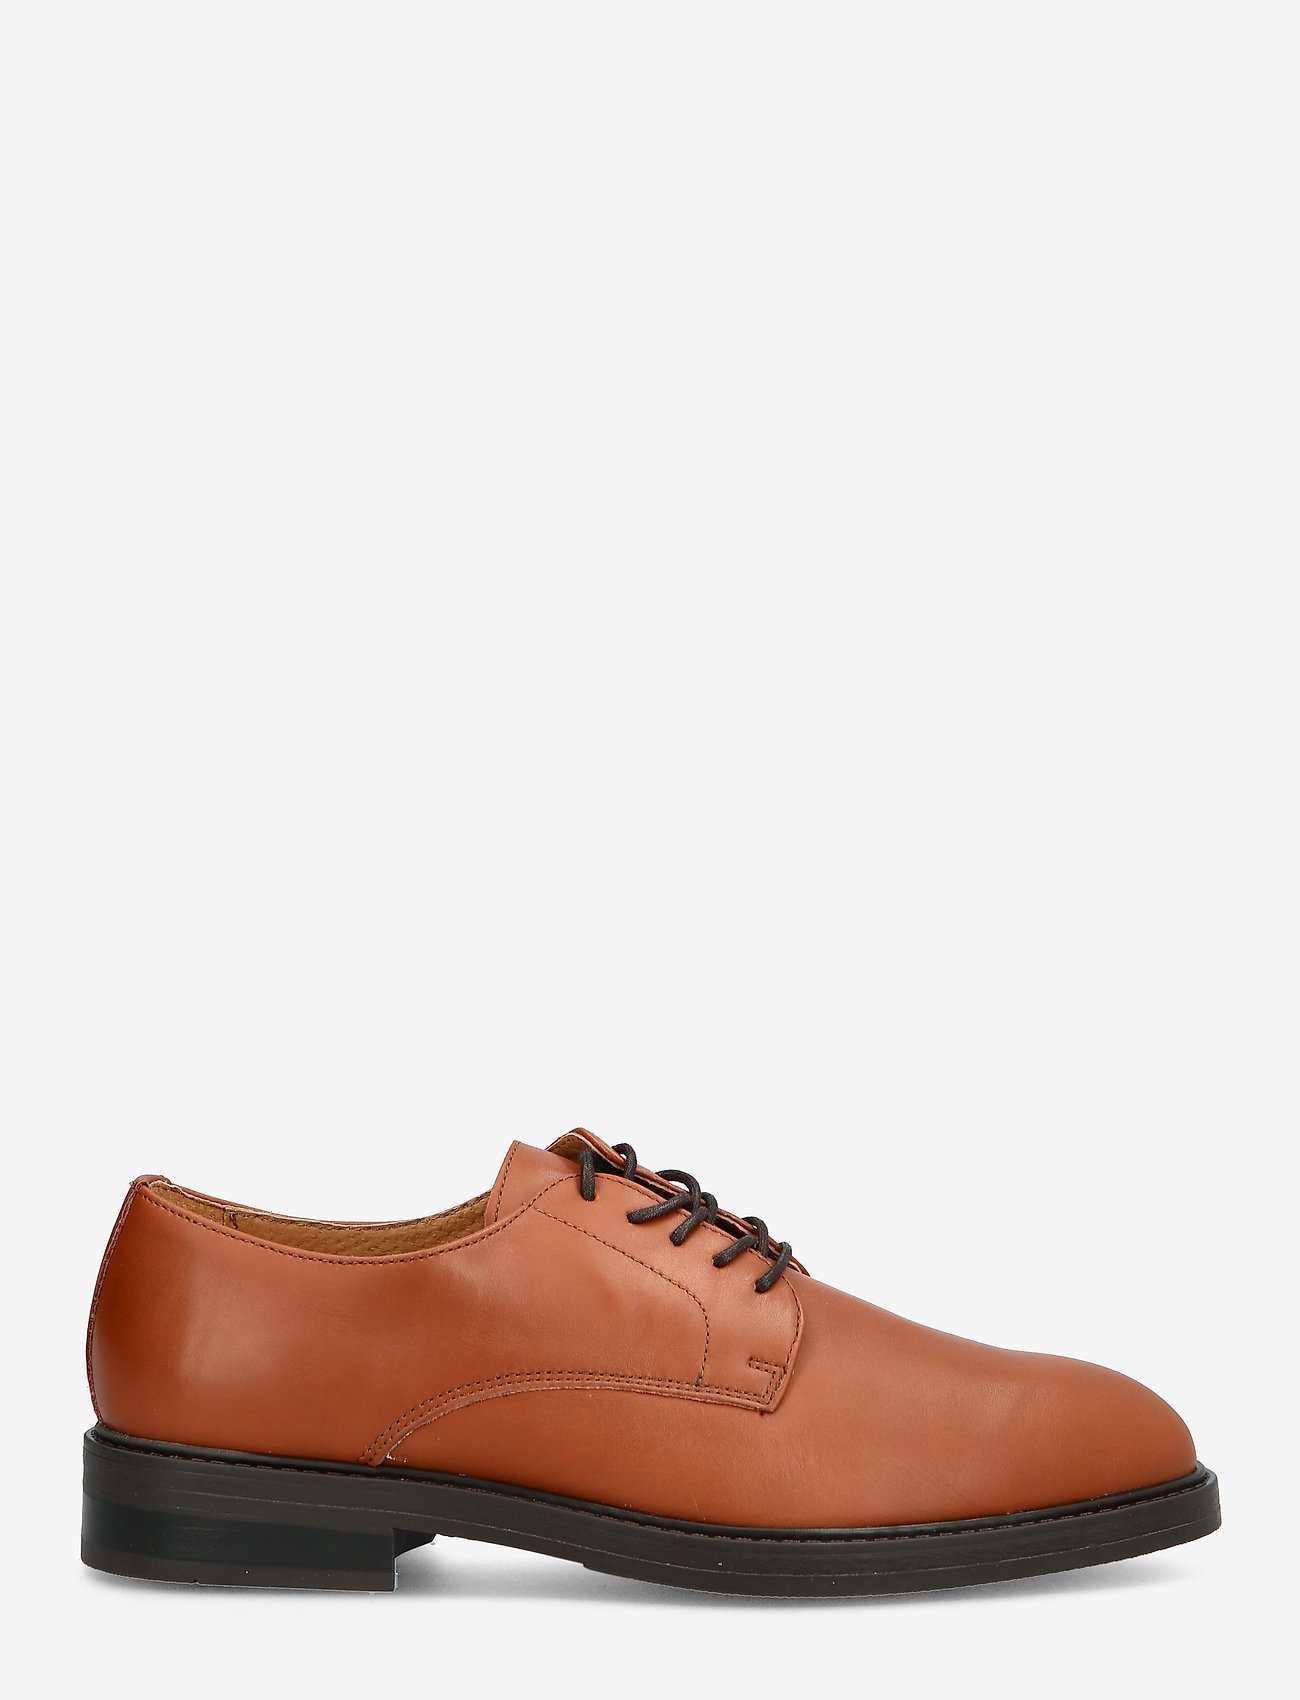 Selected Homme - SLHBLAKE LEATHER DERBY SHOE NOOS O - laced shoes - cognac - 1